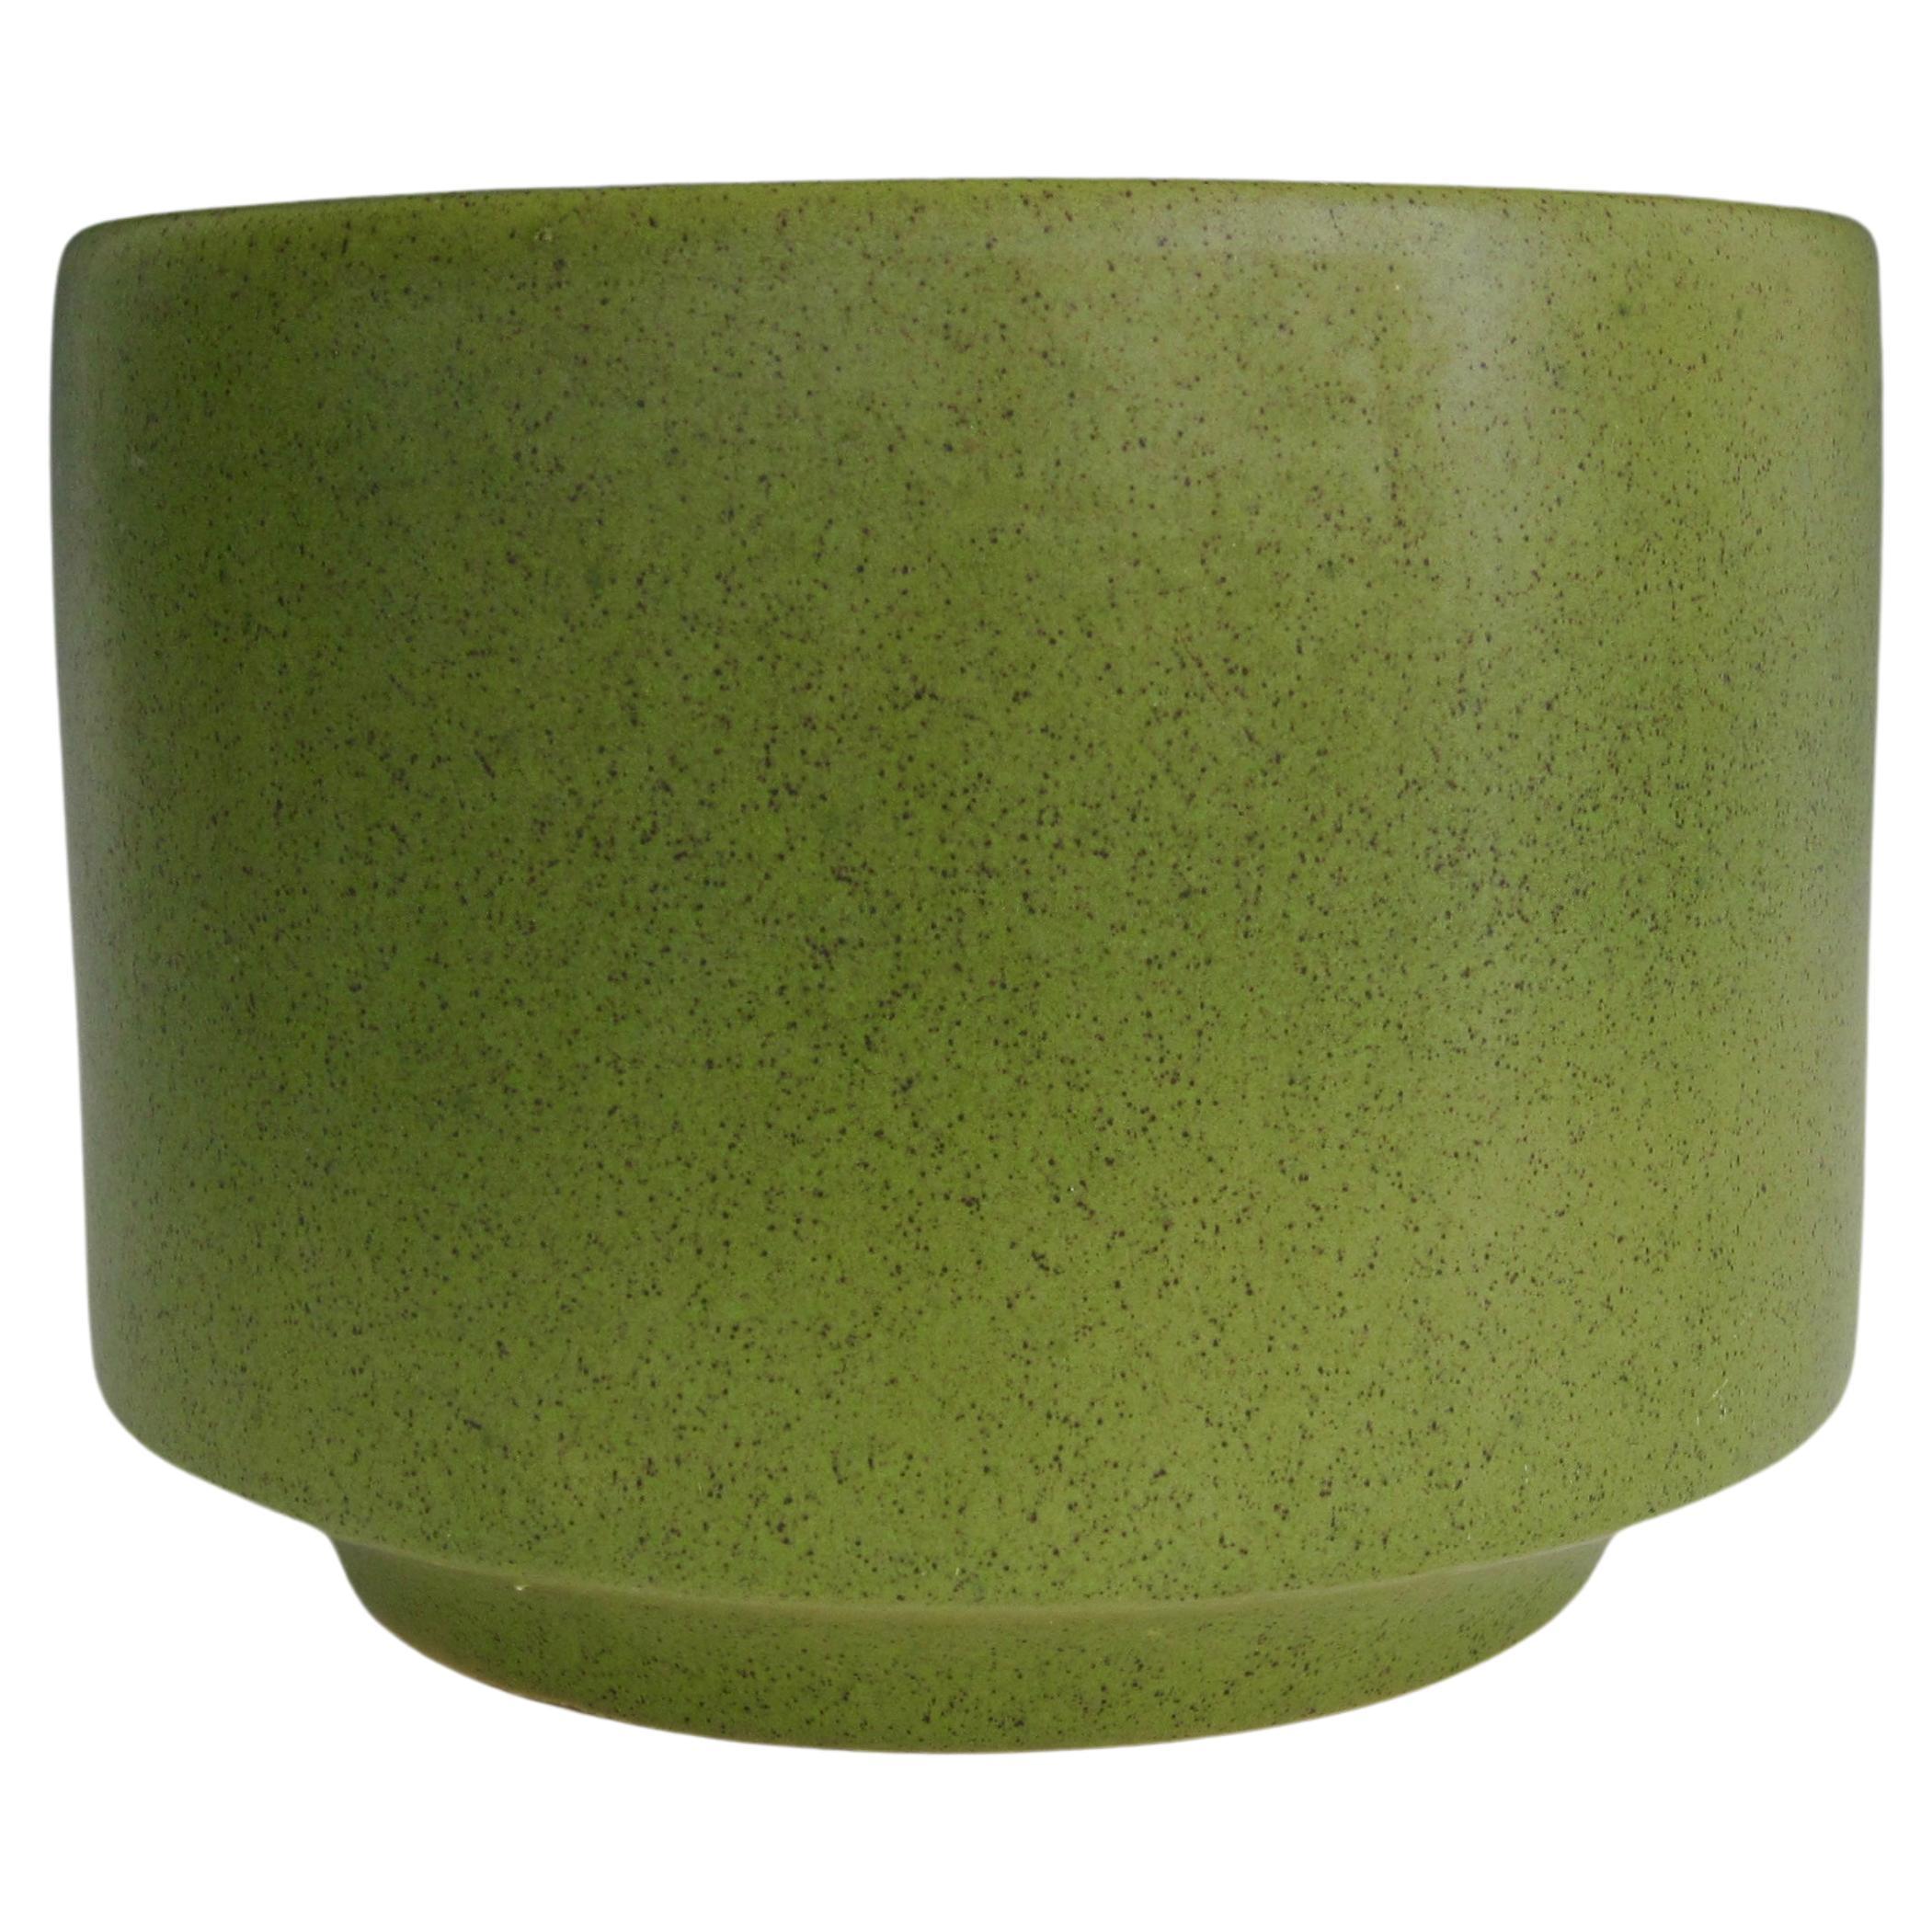 California Pottery Green Speckled Planter Pot 